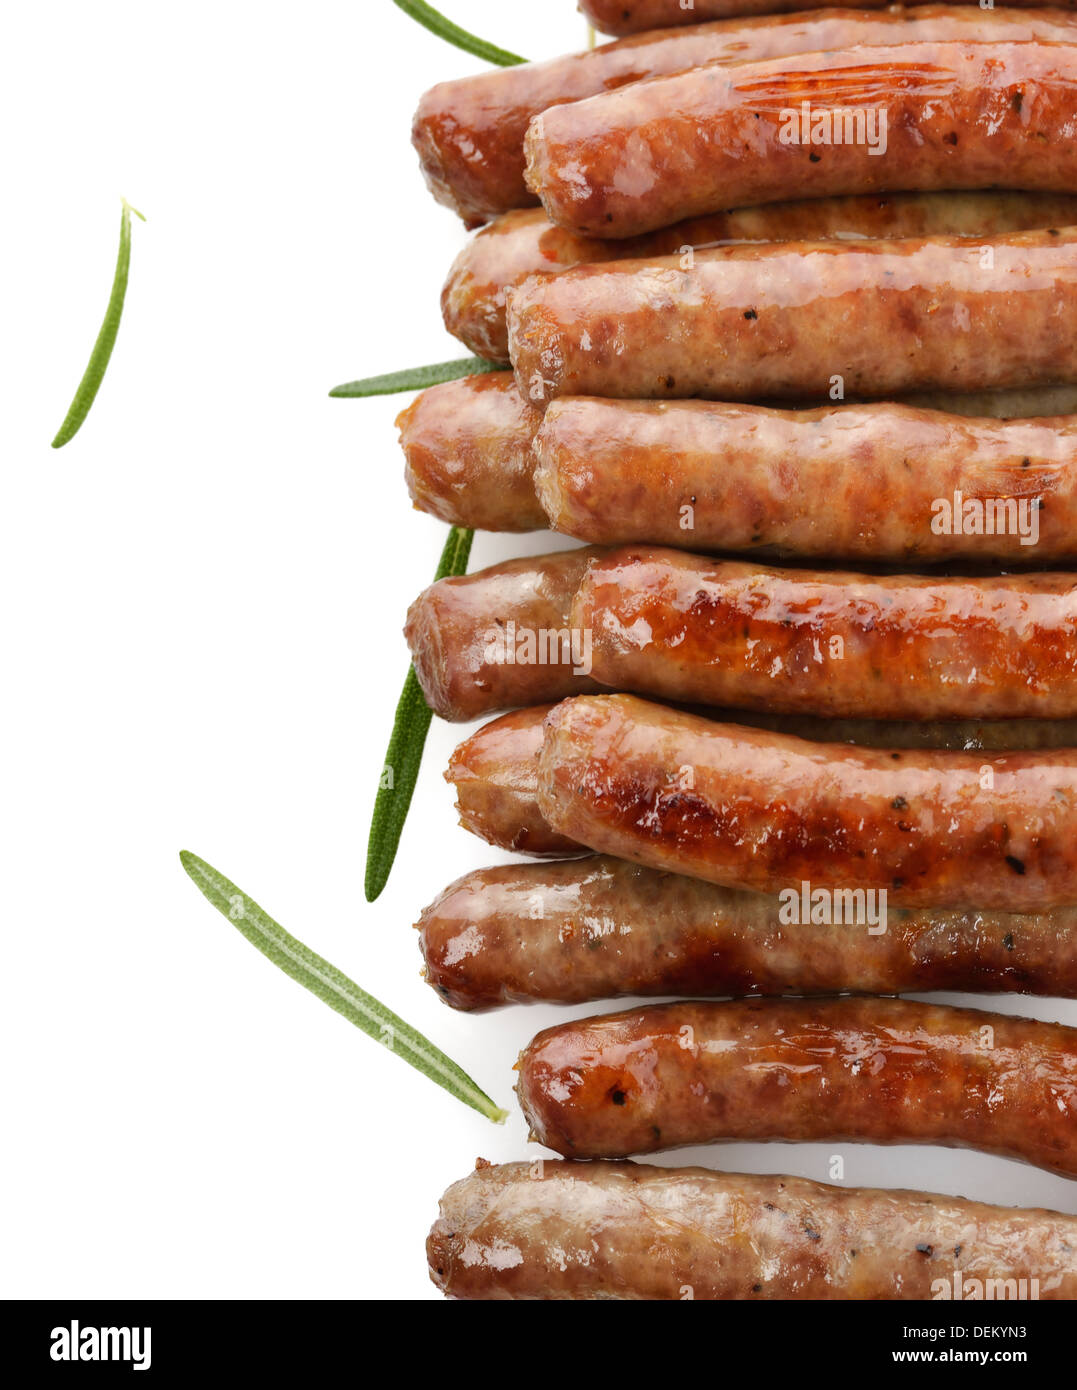 Fried Breakfast Sausage Links,Close Up Stock Photo